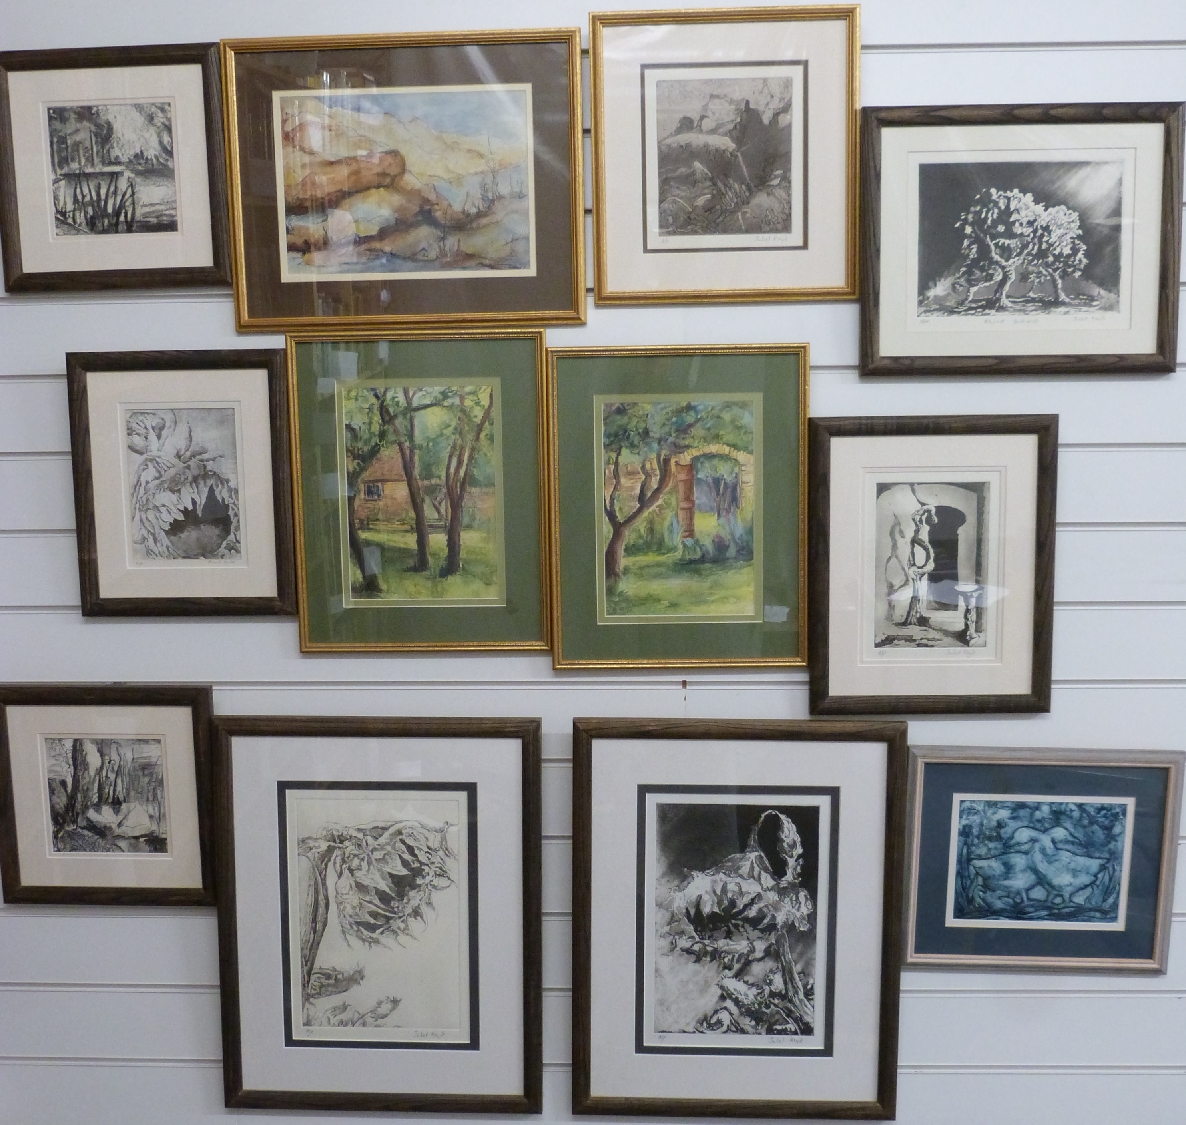 Juliet Keyte, three watercolours, two charcoal studies, five artist's proof etchings, one limited